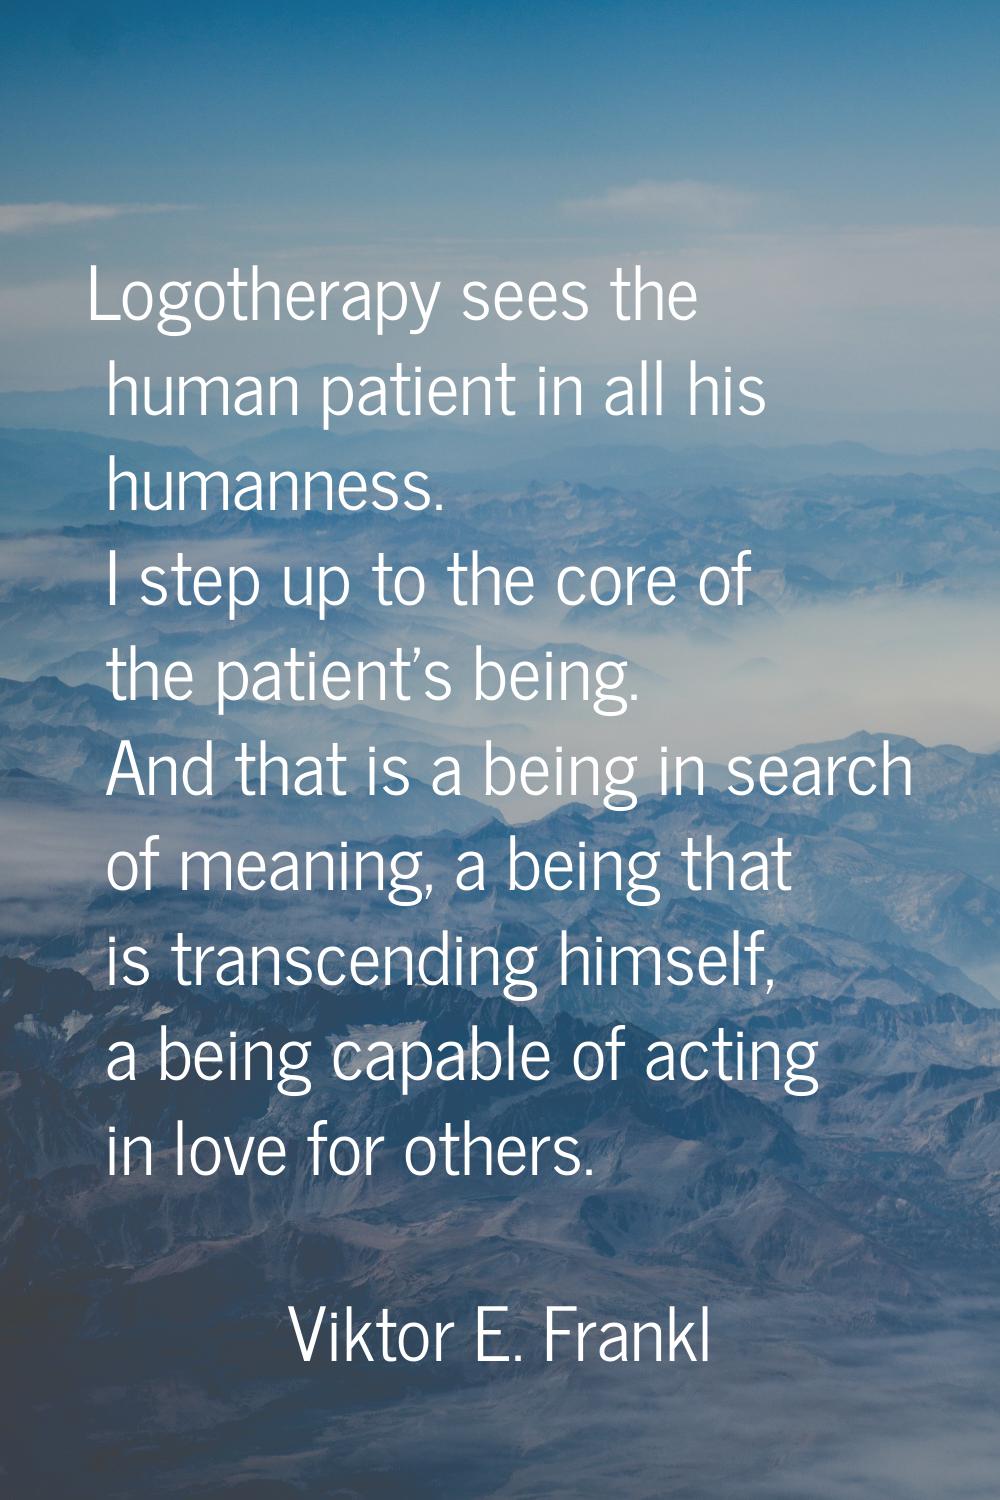 Logotherapy sees the human patient in all his humanness. I step up to the core of the patient's bei